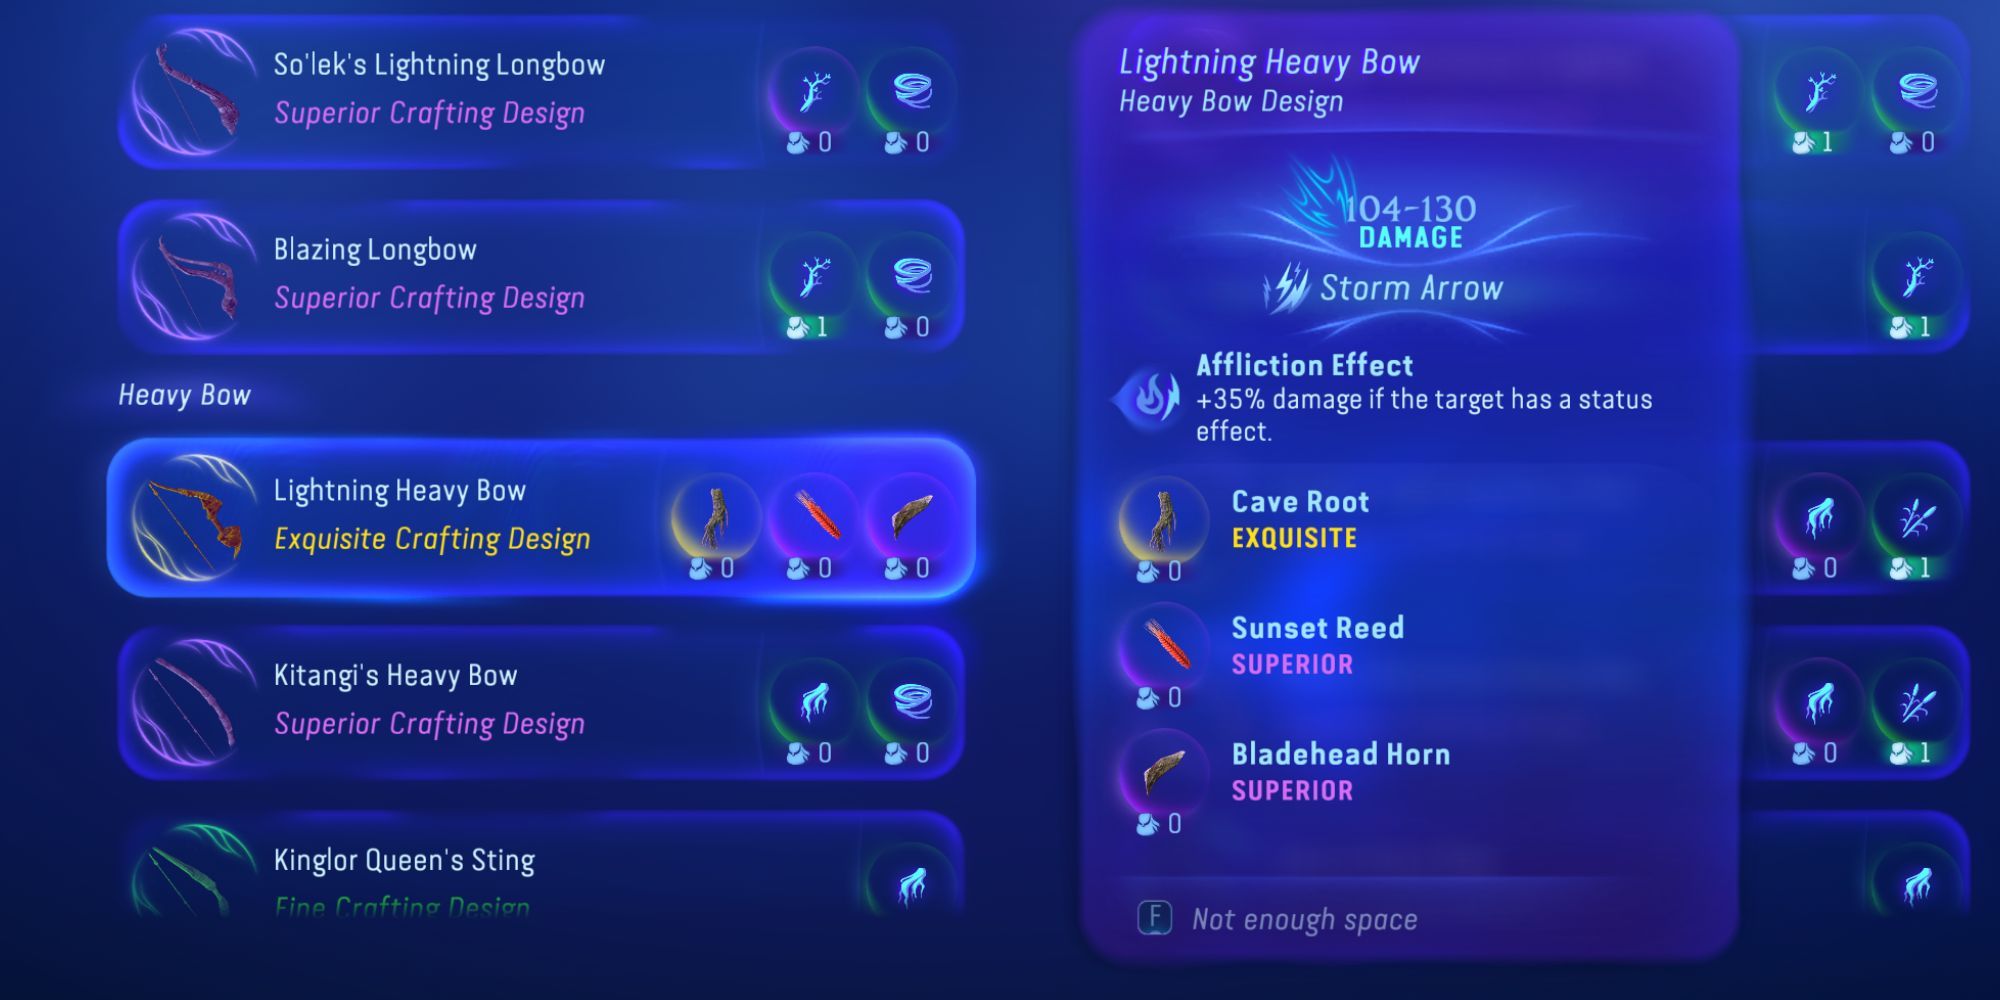 The recipe for the lightning heavy bow in the player's inventory